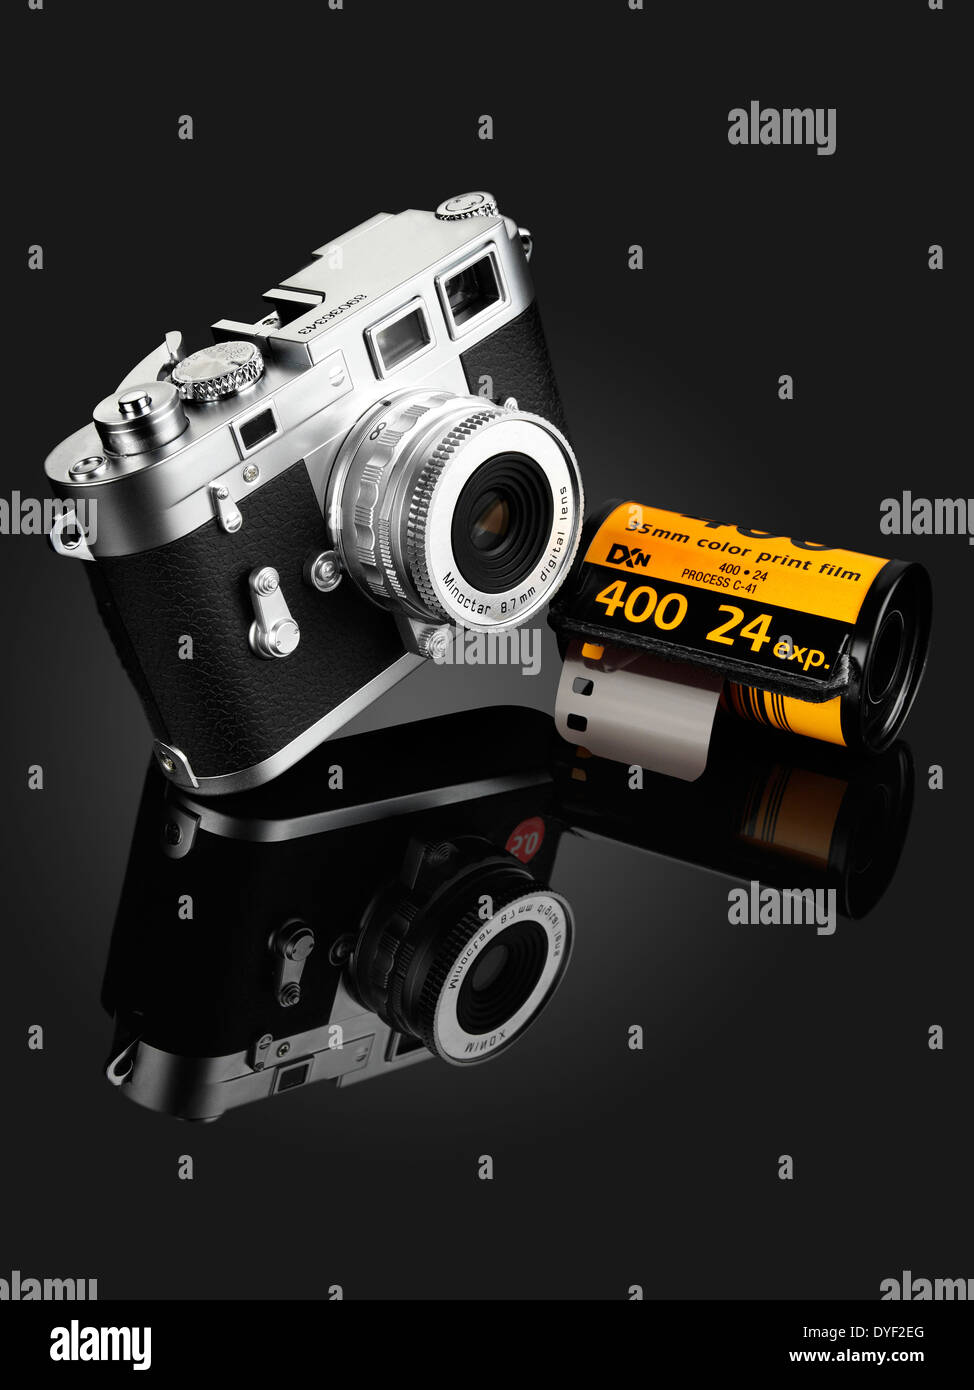 A FUJIFILM SILVER AND BLACK CAMERA WITH A ROLL OF KODAK FILM ON A GRADUATED BLACK BACKGROUND WITH REFLECTION Stock Photo